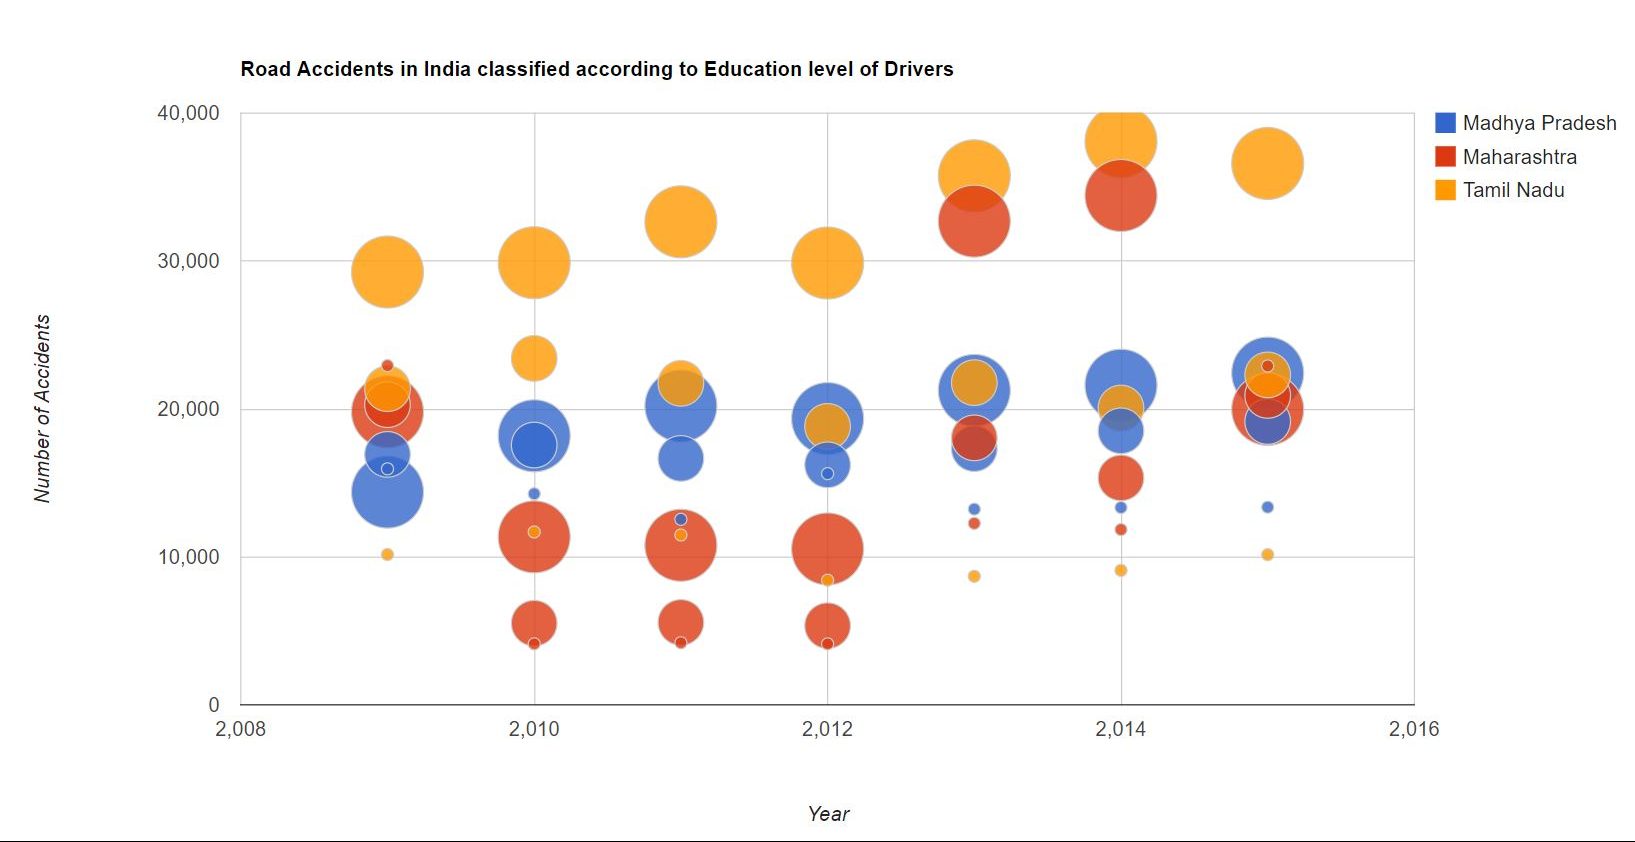 So, less educated drivers cause more road accidents? Think again.